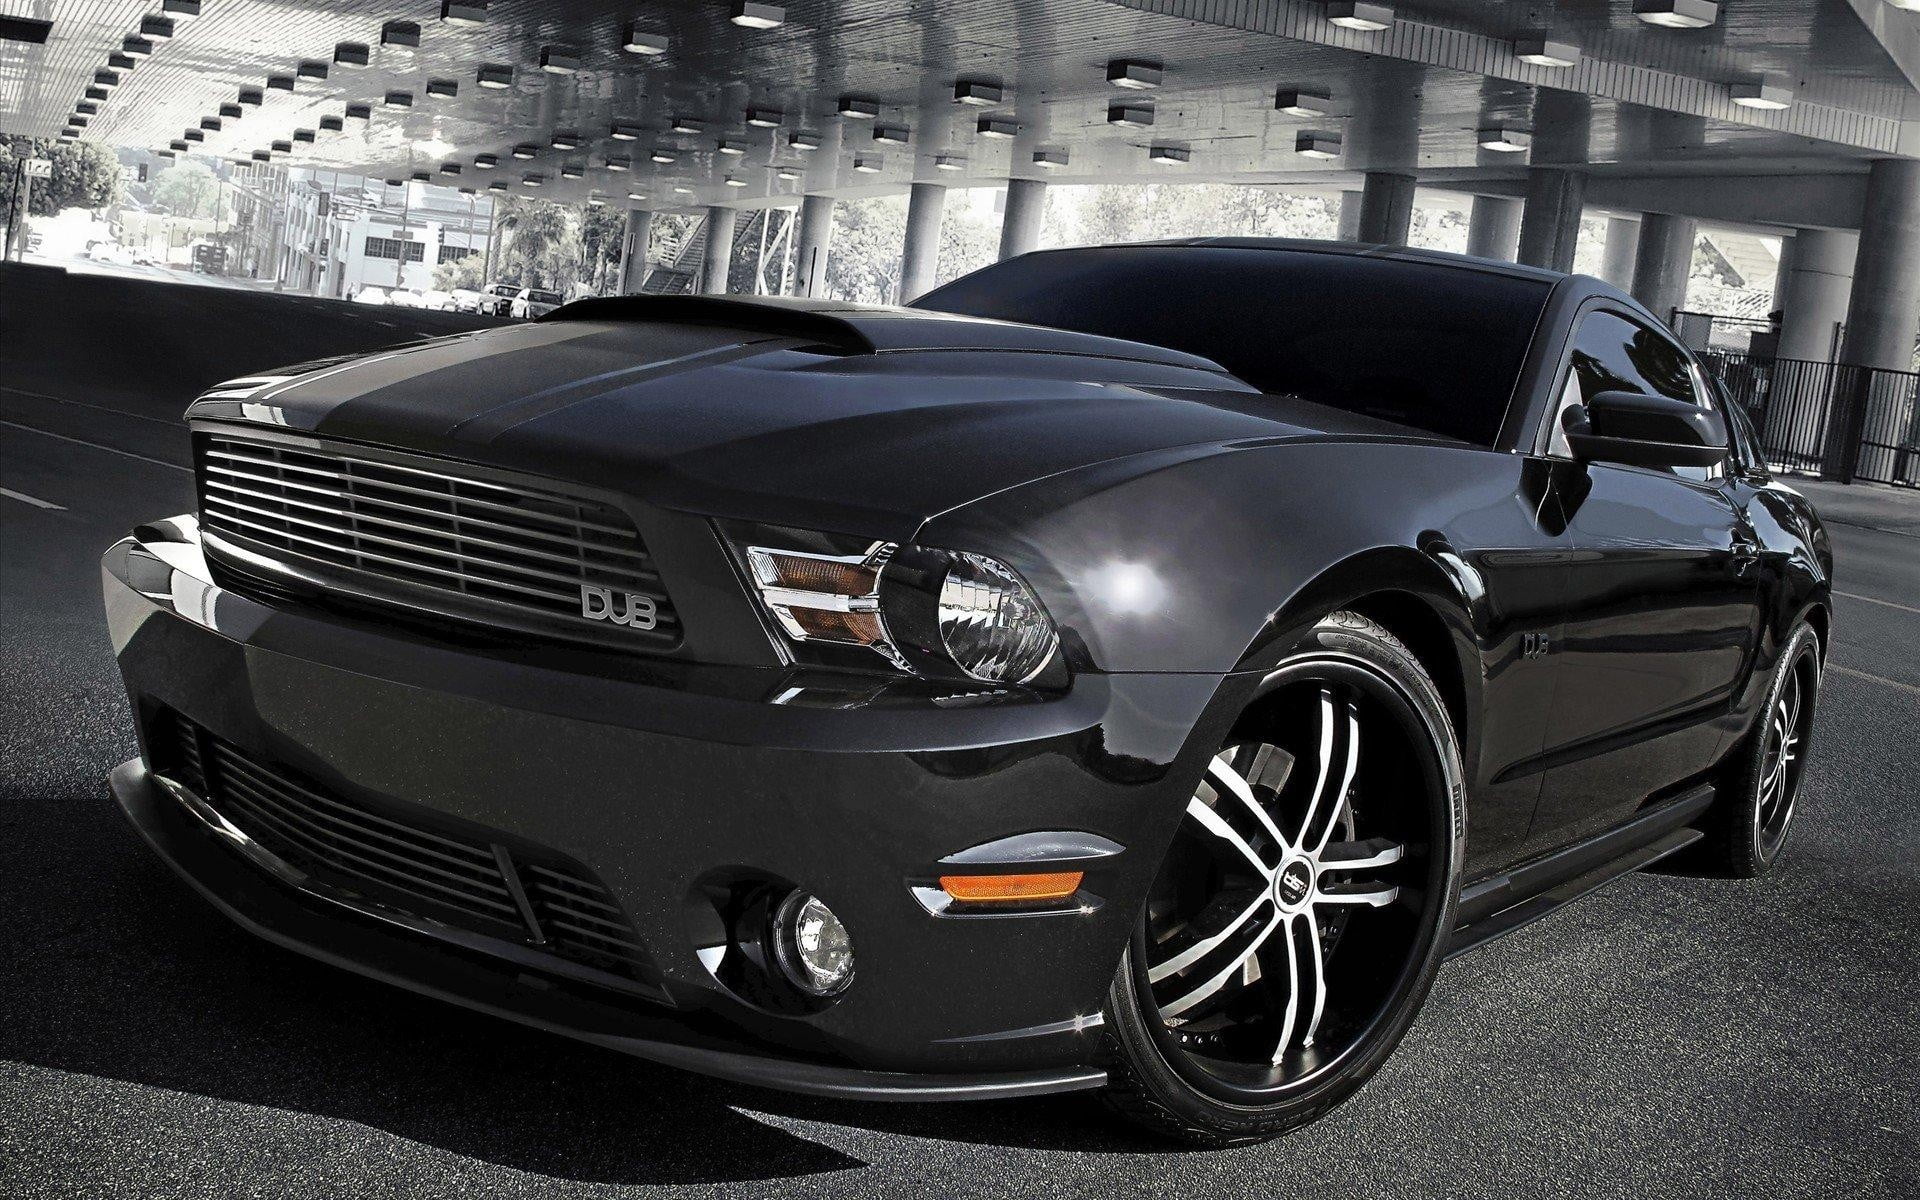 grey Dub Ford Shelby Mustang GT500 coupe, car, Ford Mustang